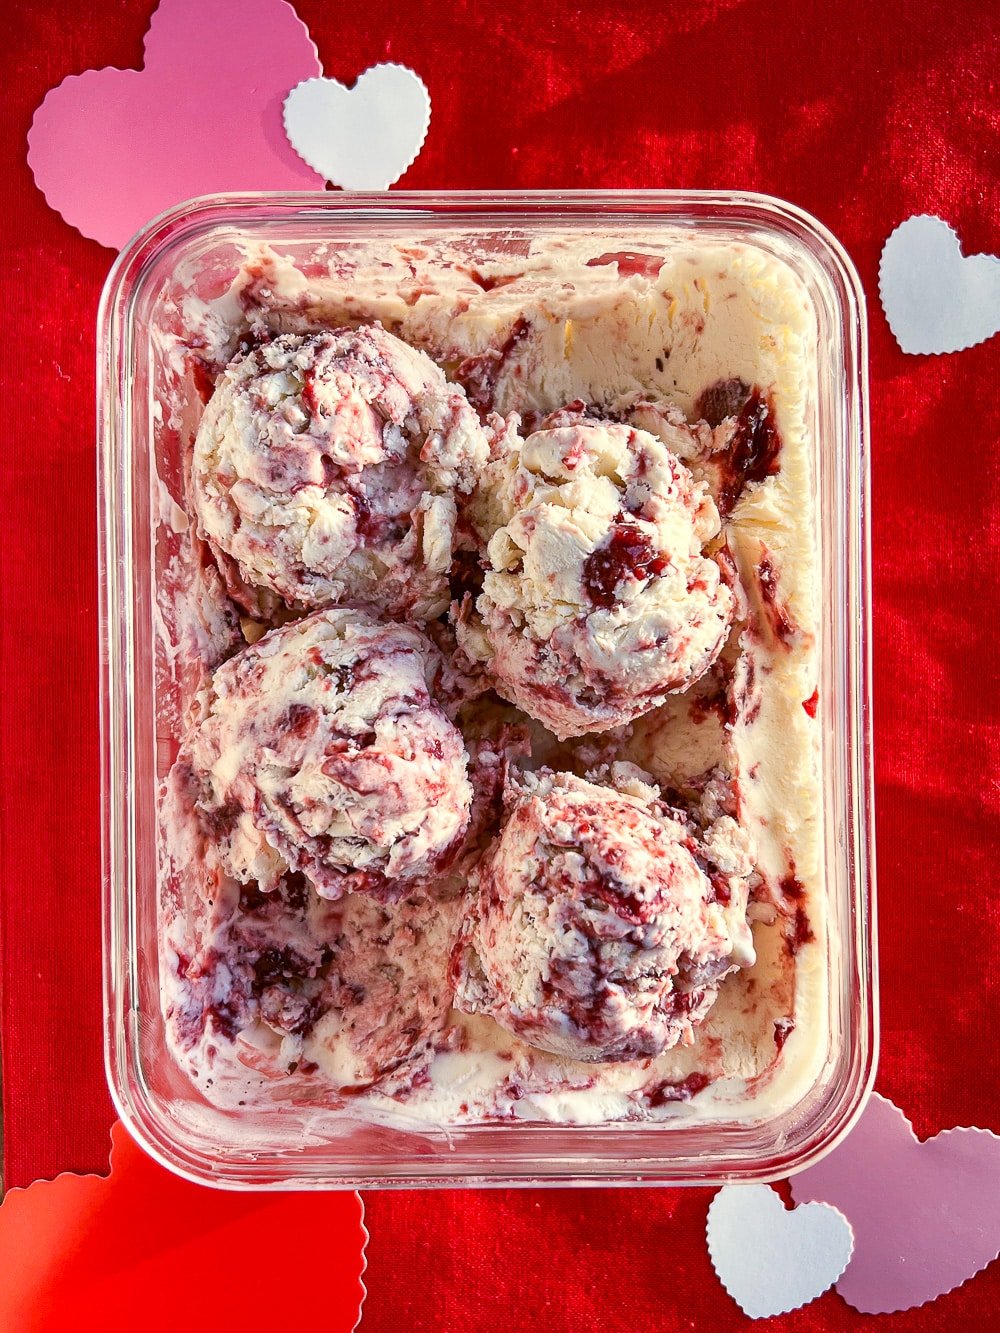 No Churn Strawberry Vanilla Ice Cream in a glass scon tainer with Valentines decorations